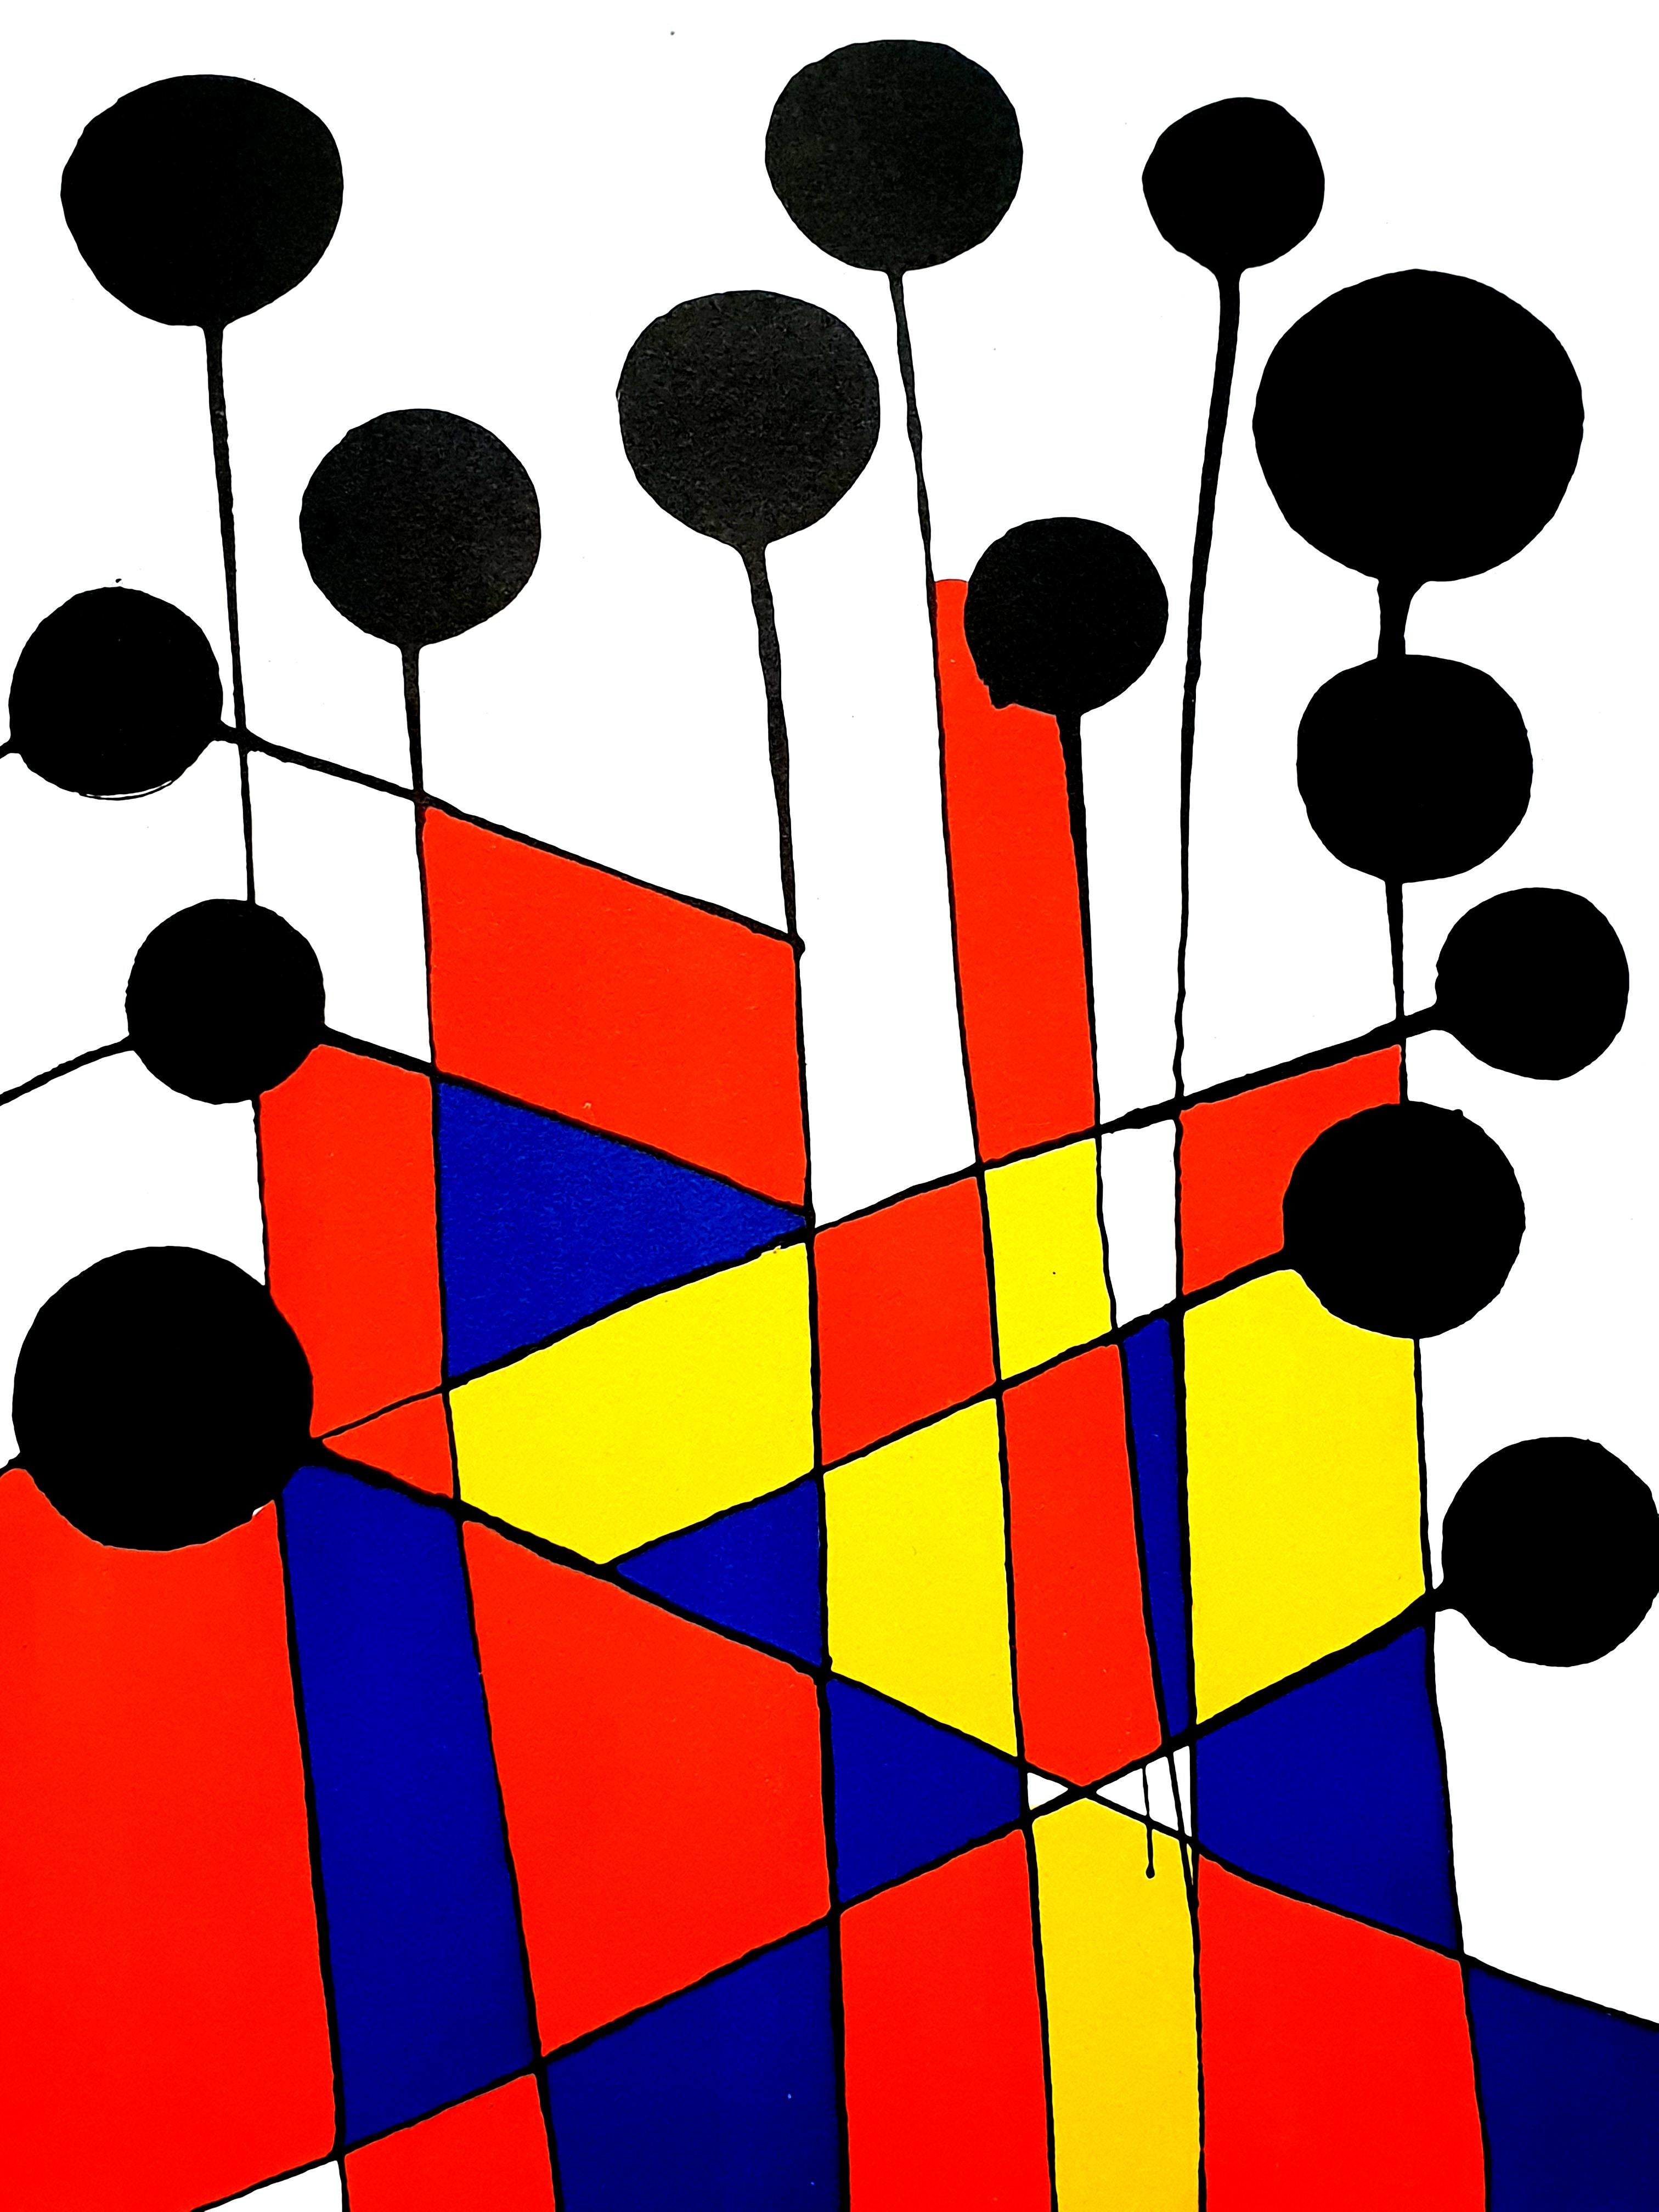 Alexander Calder - Original Lithograph - Composition
Colorful Abstraction
1971
From the journal "XXe Siecle"
Unsigned edition
Dimensions: 32 x 24
Edition: G. di San Lazzaro.

Alexander Calder (1898 - 1976)

The American artist Alexander Calder was